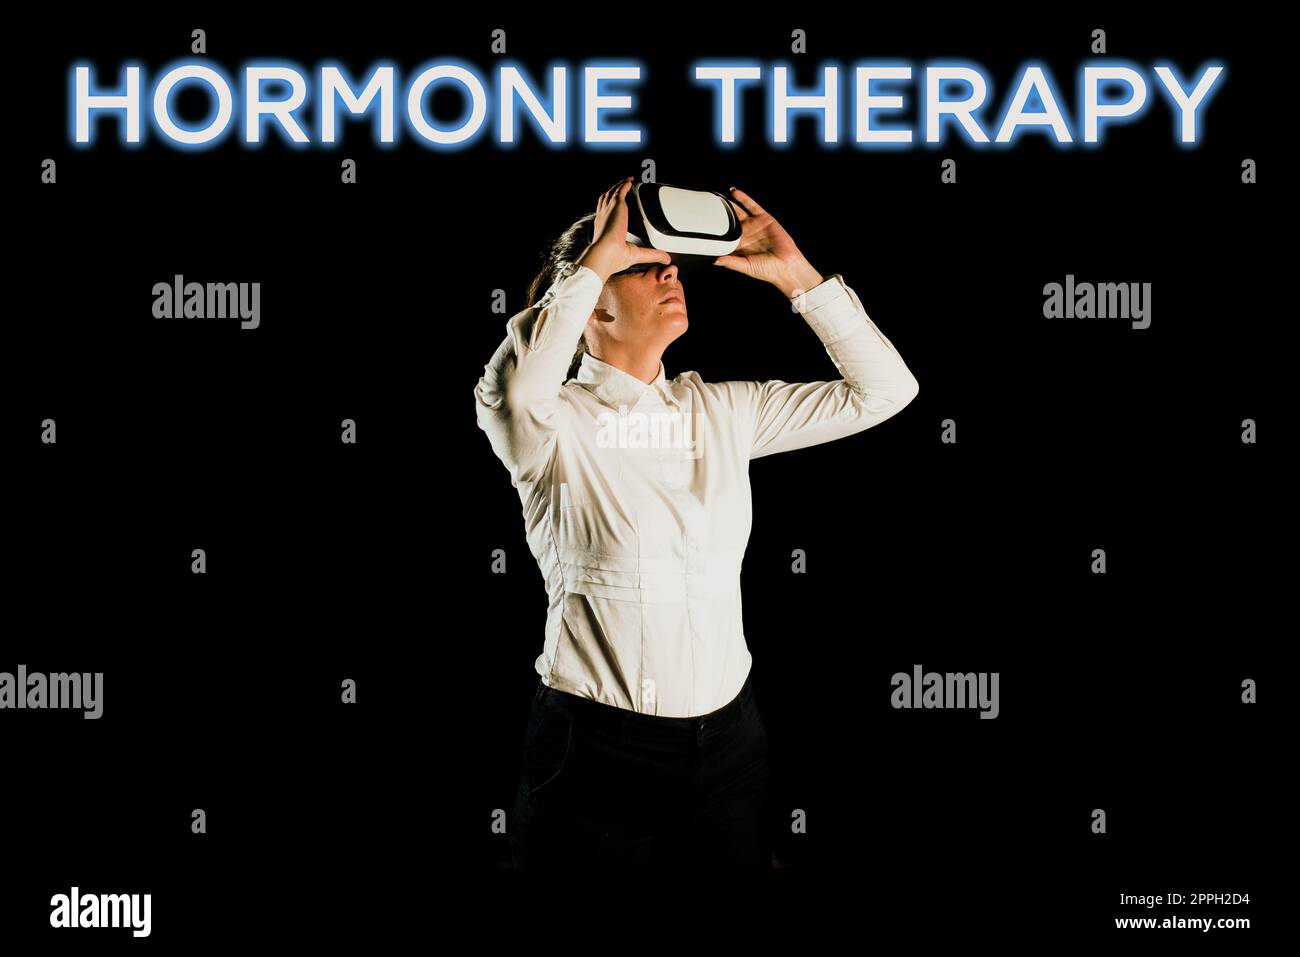 Conceptual display Hormone Therapy. Business showcase treatment of disease with synthetic derived hormones Stock Photo